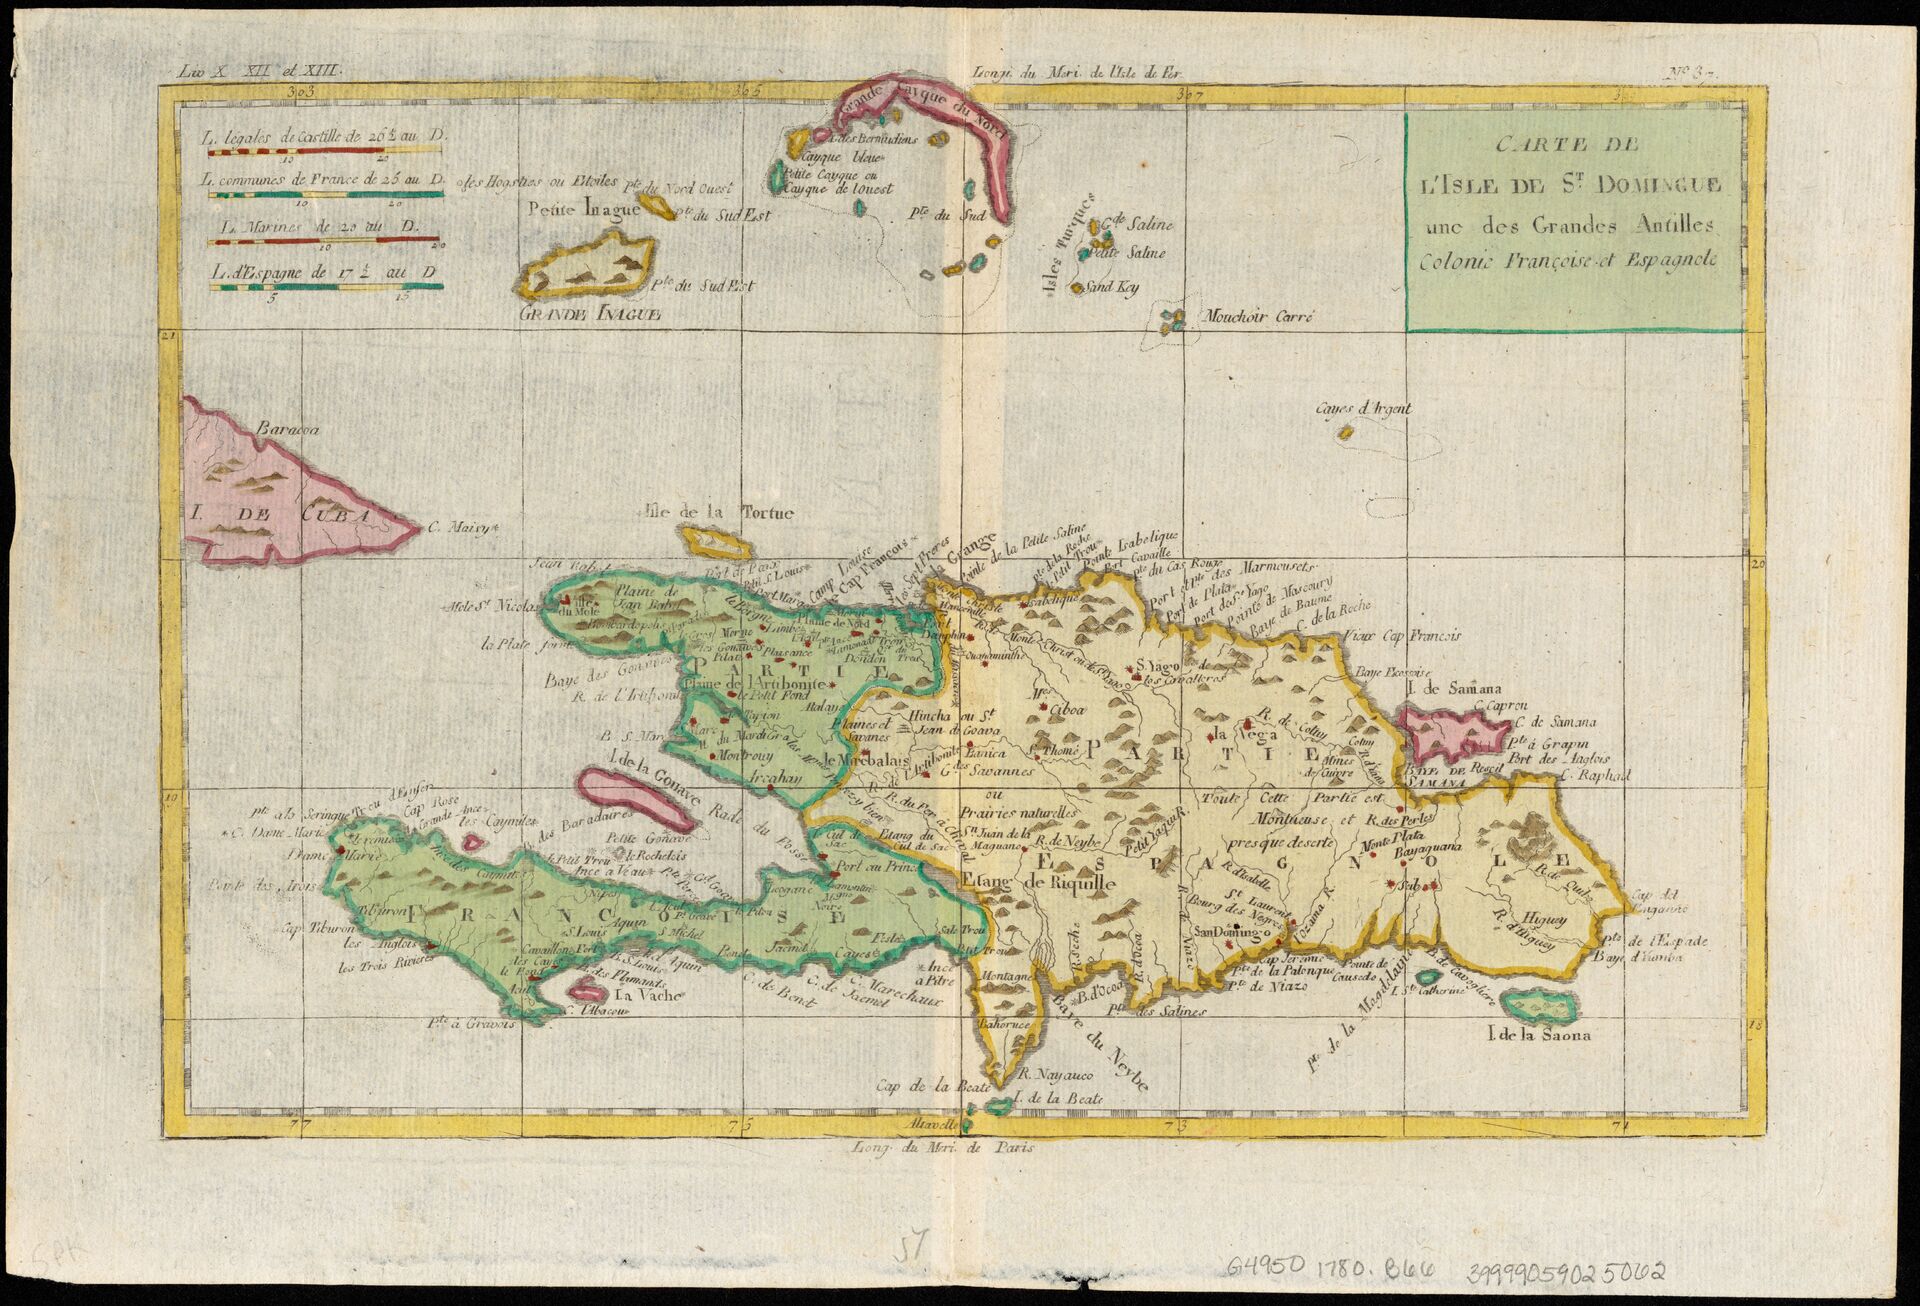 03 Map of L'Isle de St. Domingue one of the Greater Antilles .jpg